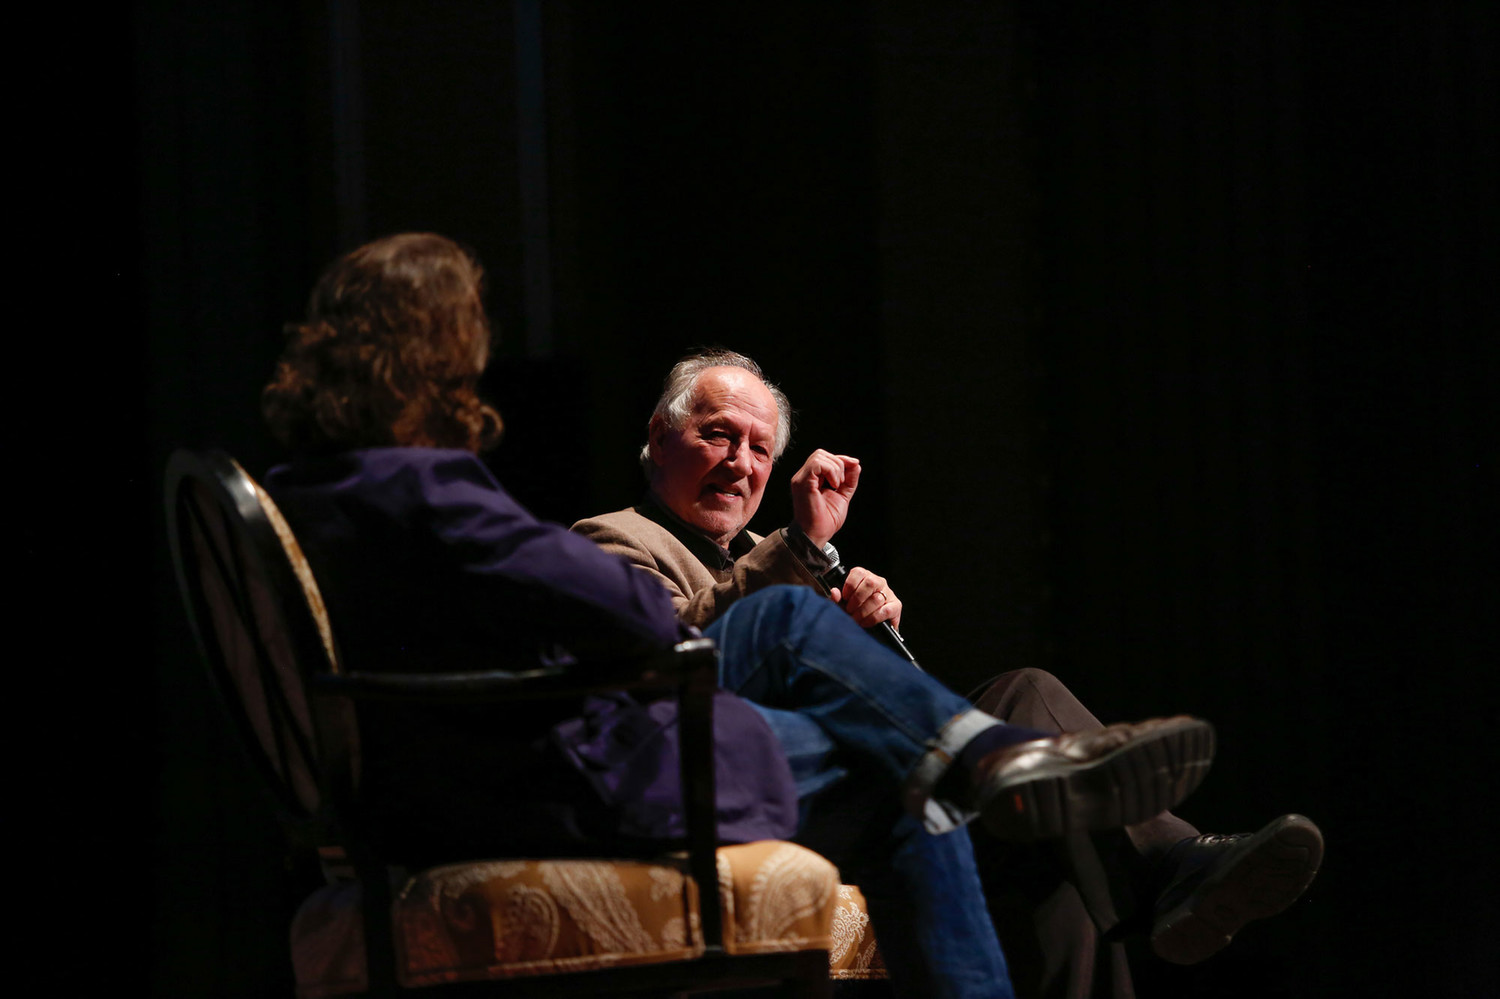 A converstaion with Werner Herzog on stage for the Virginia Film Festival